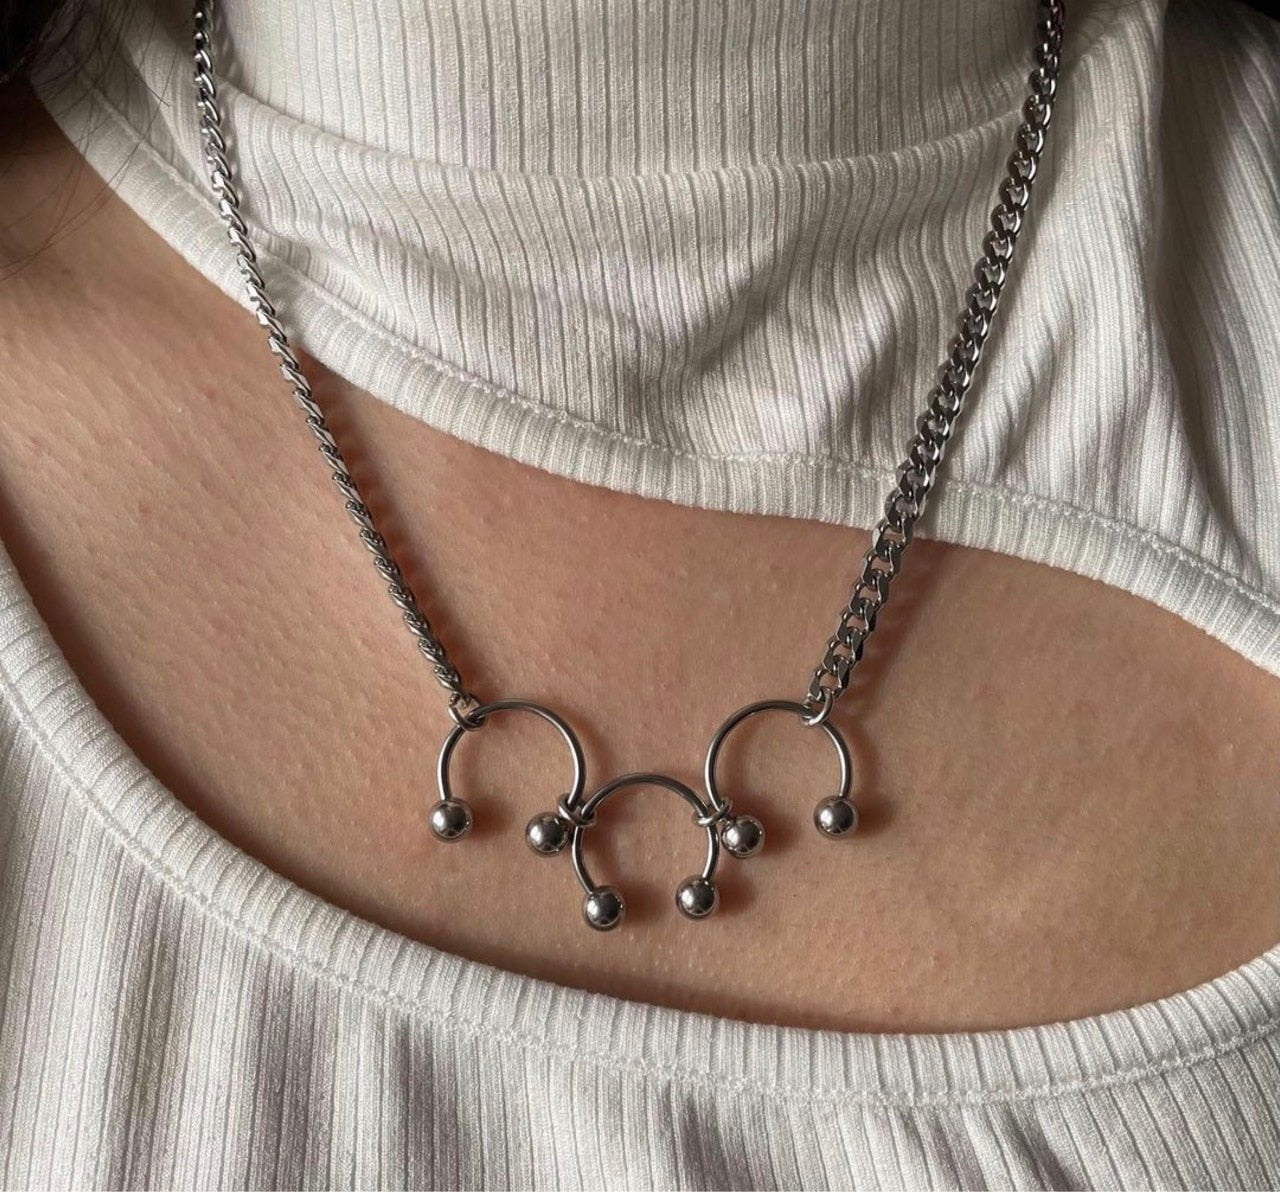 Horseshoe Chains Chokers Necklace -